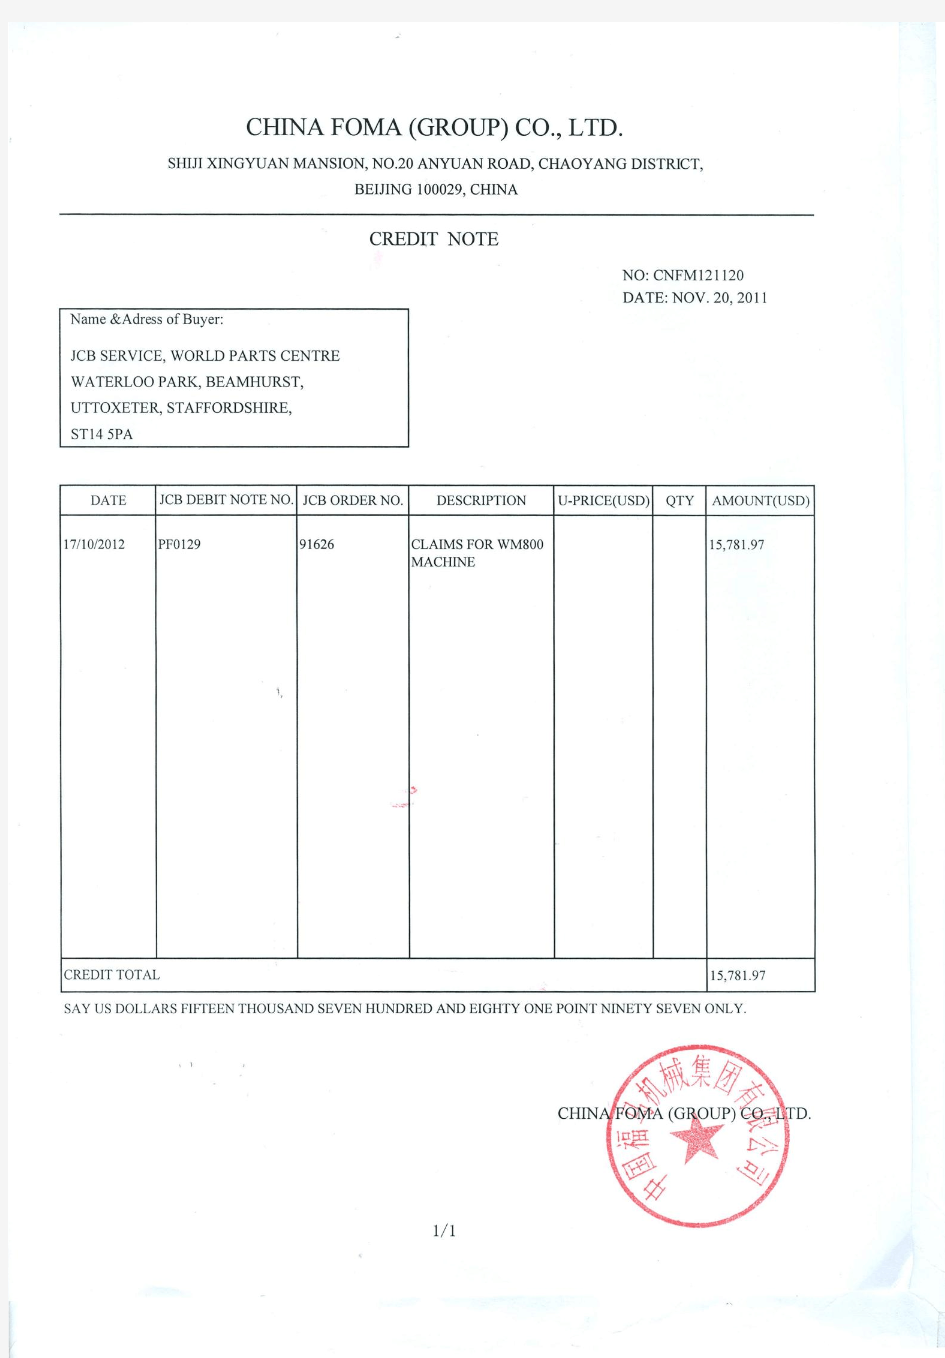 CREDIT NOTE of the China Foma Debit Note